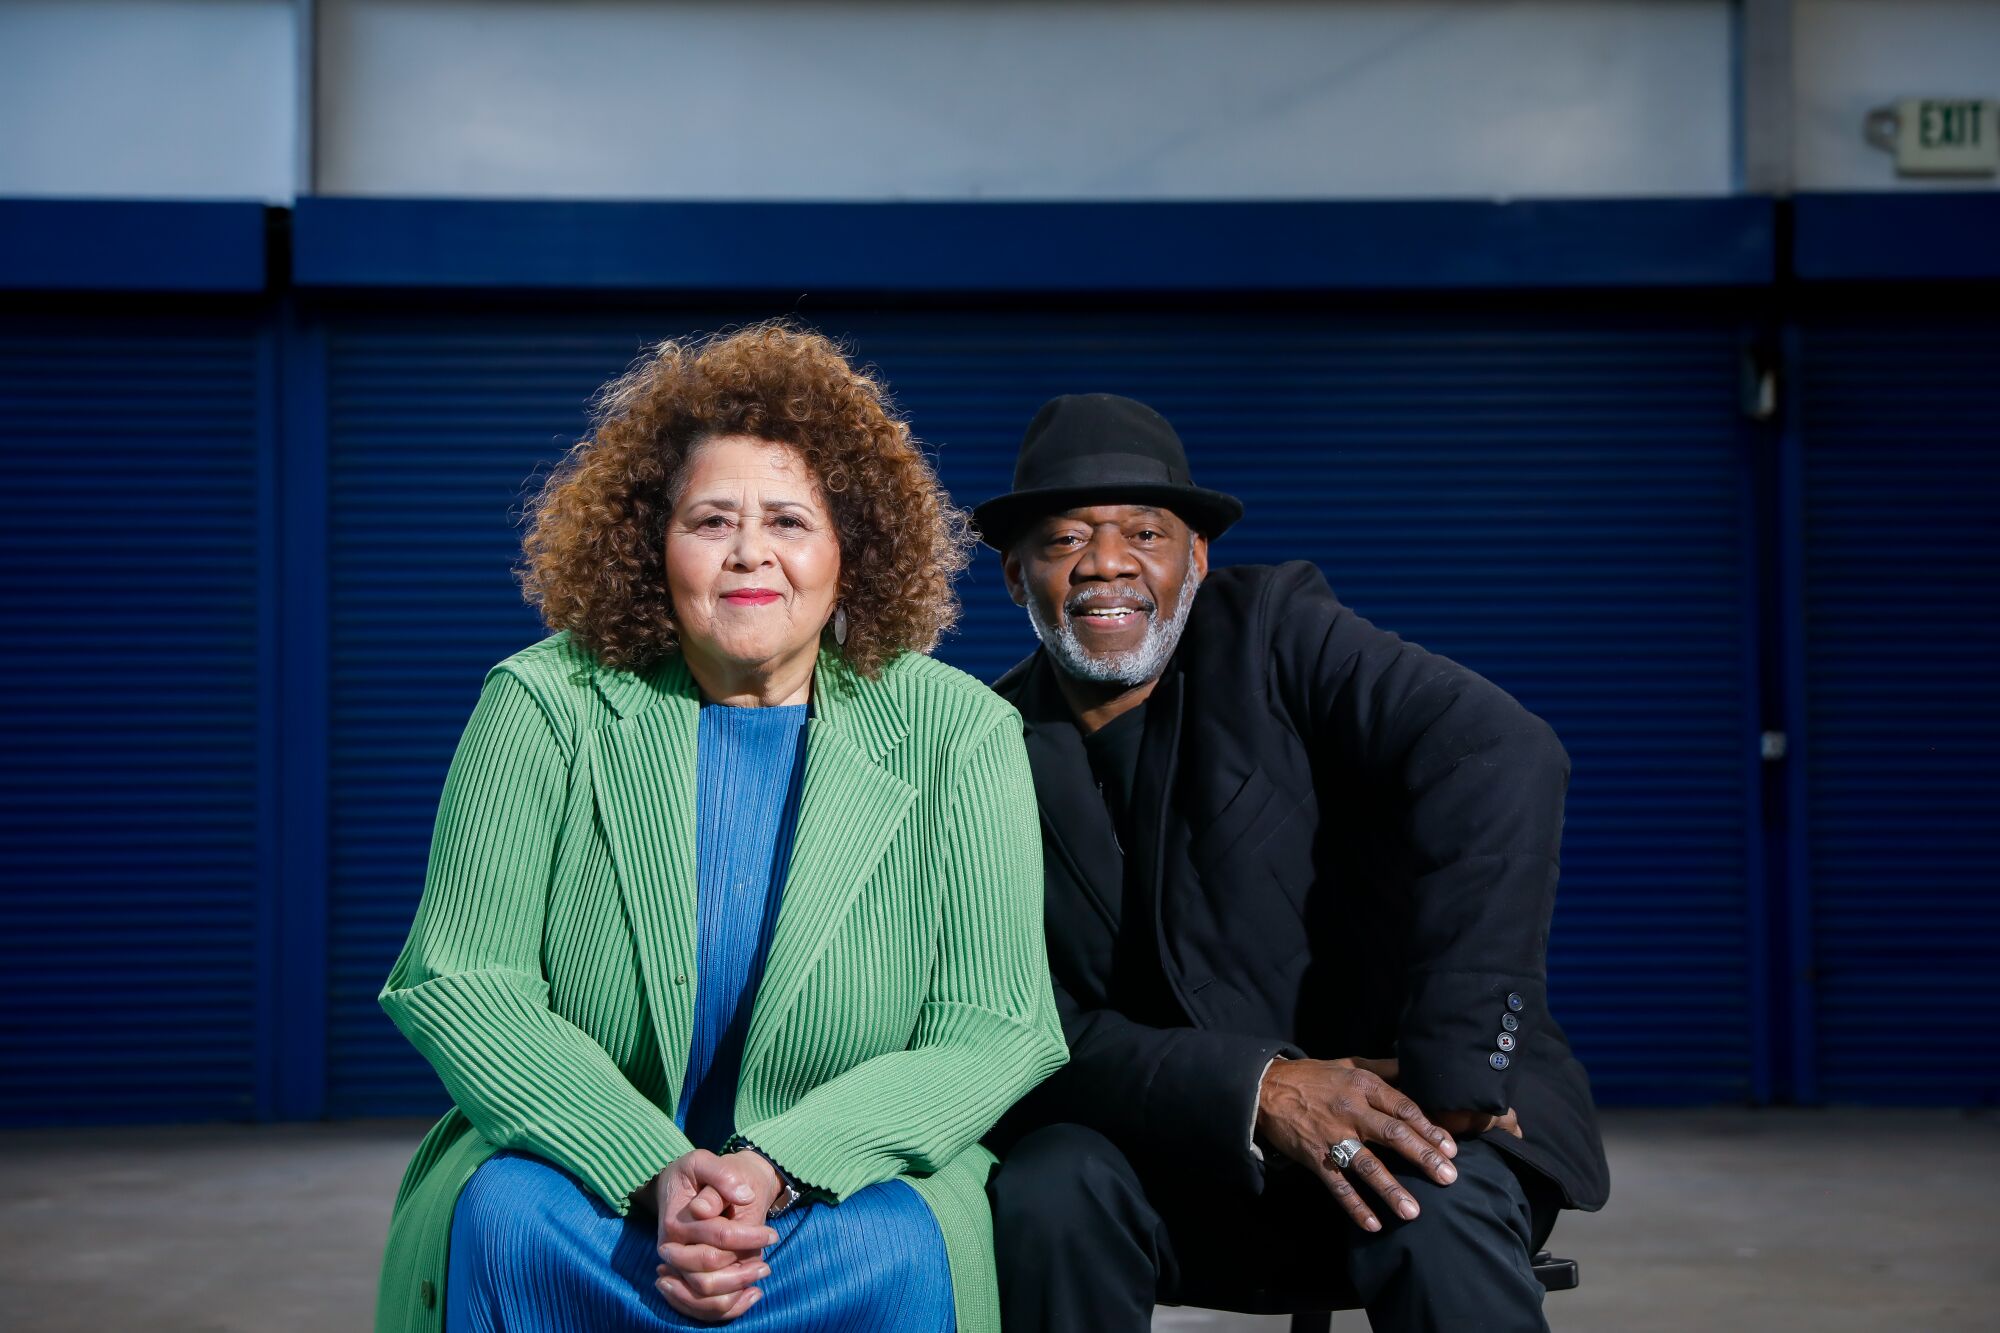 Playwright Anna Deavere Smith and director Gregg Daniel smile for the camera, seated next to each other.